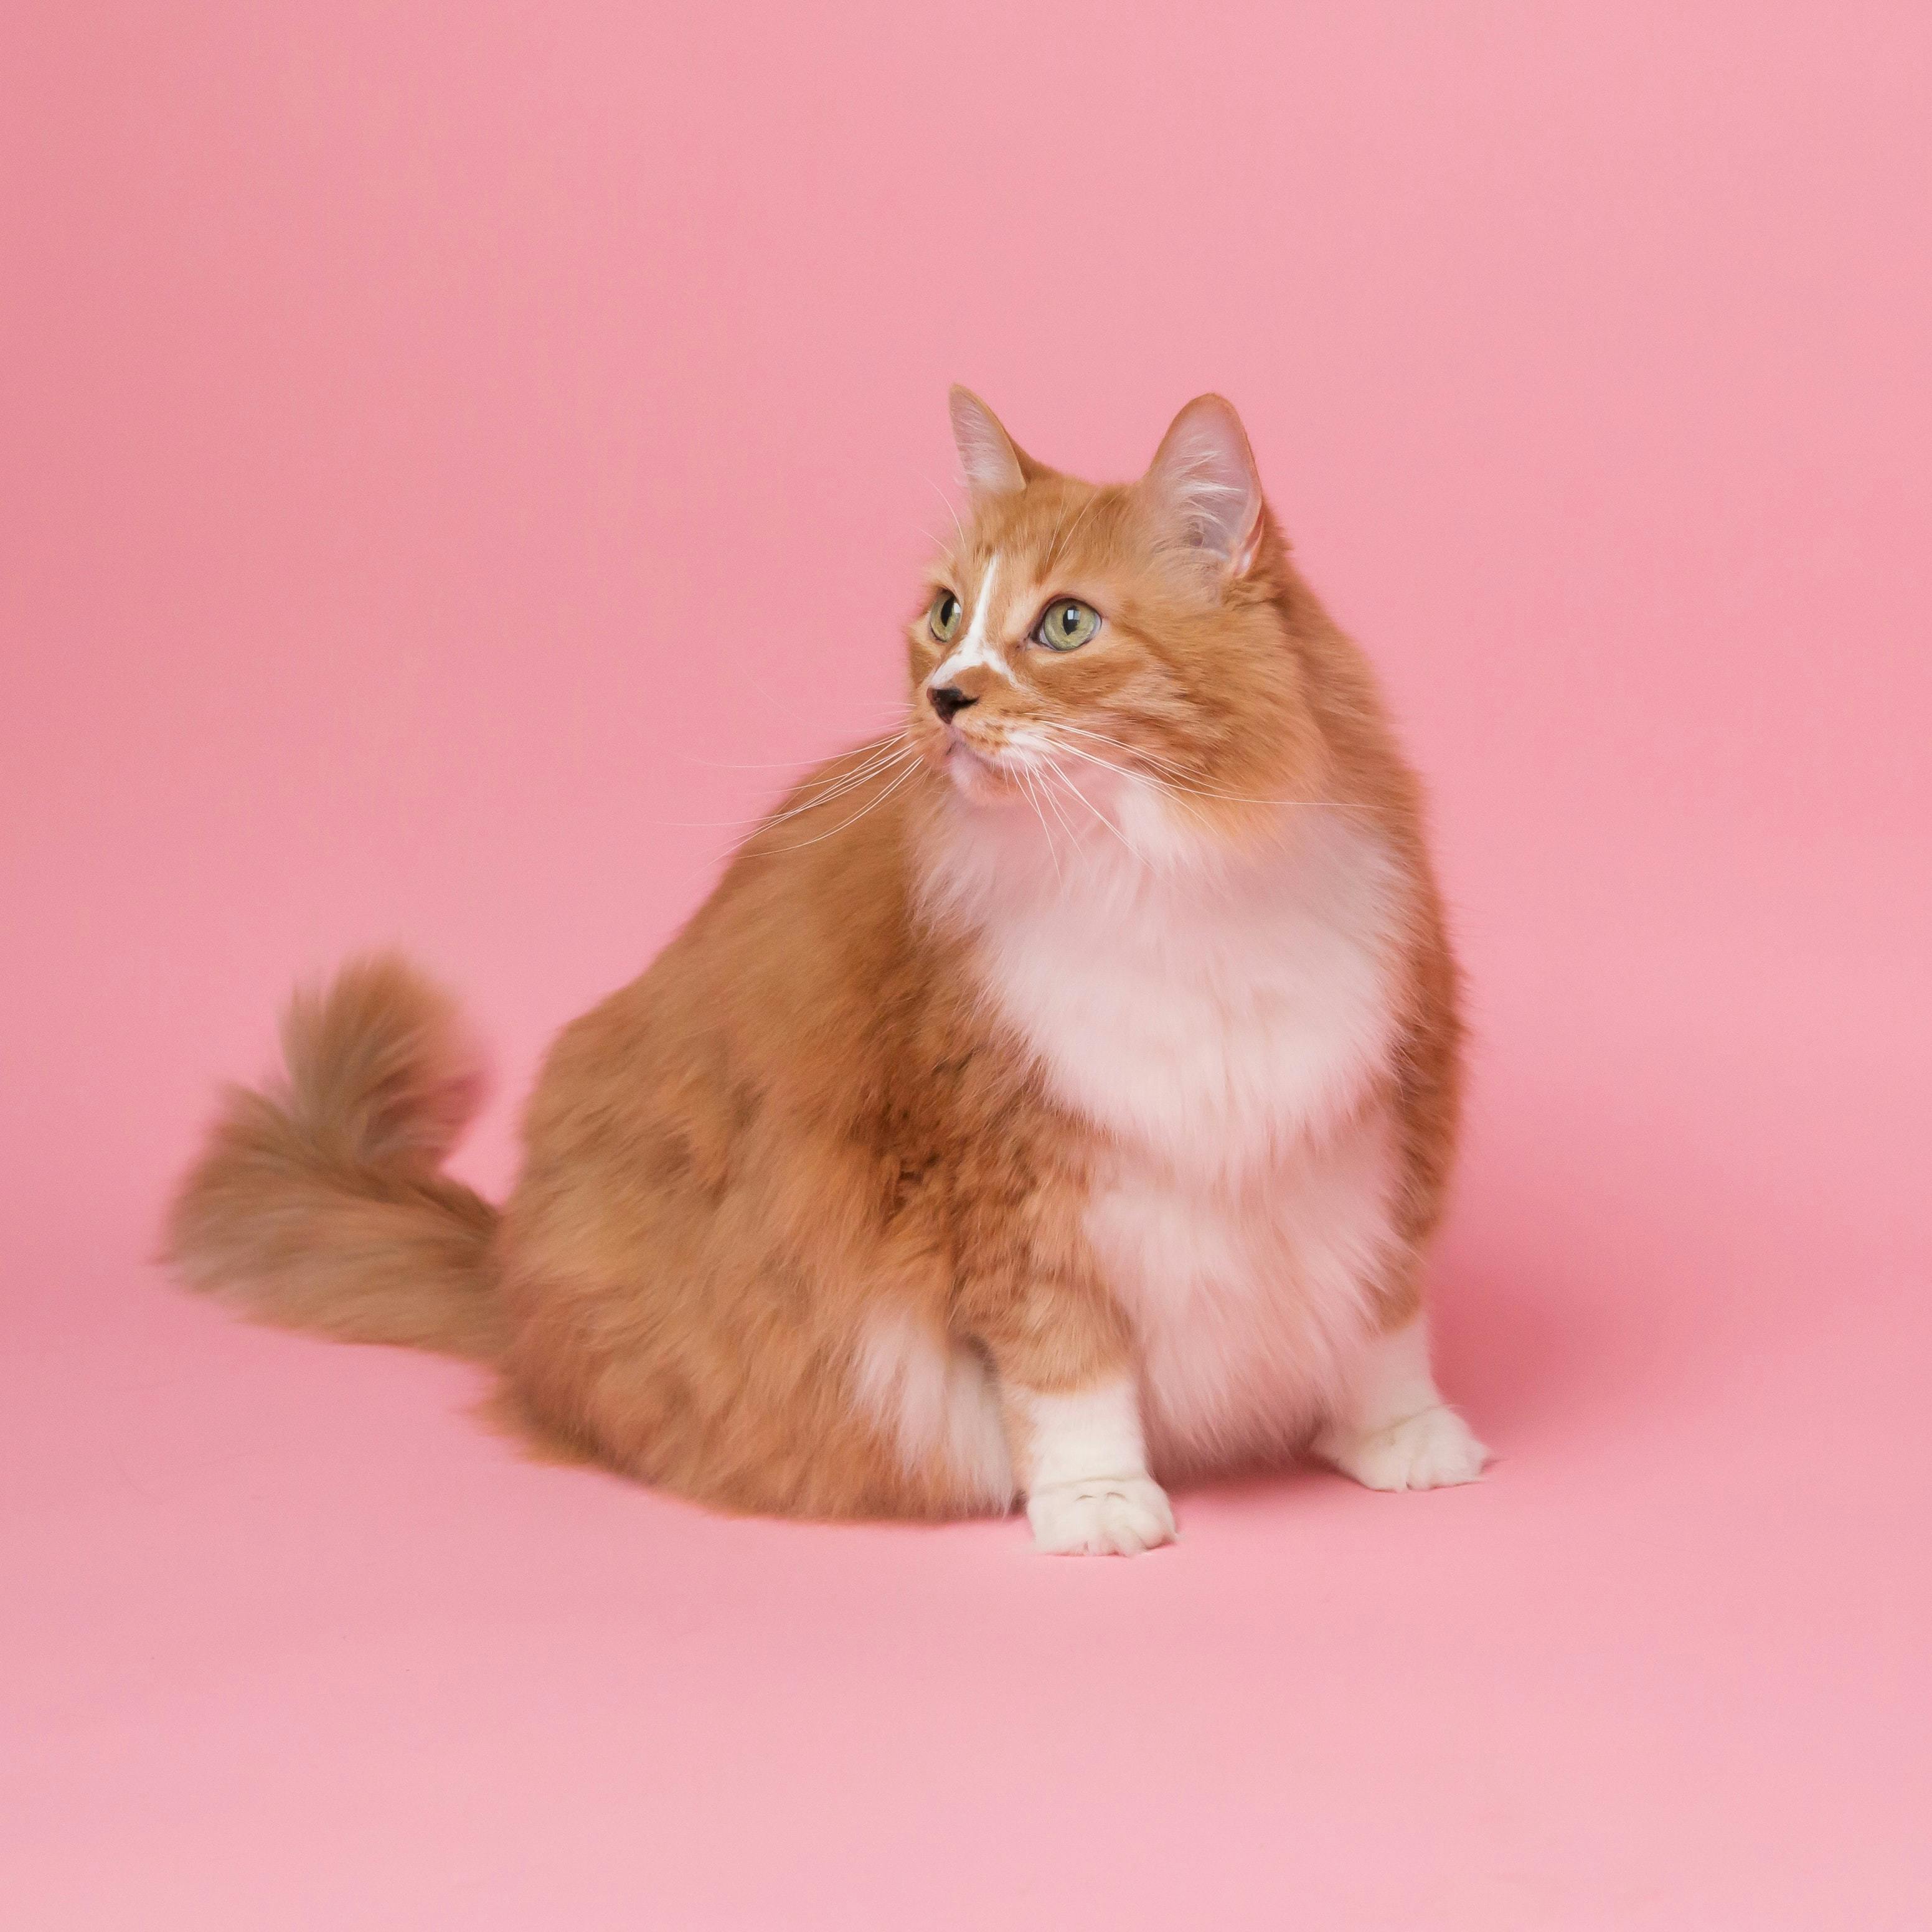 Fat cat in front of pink background